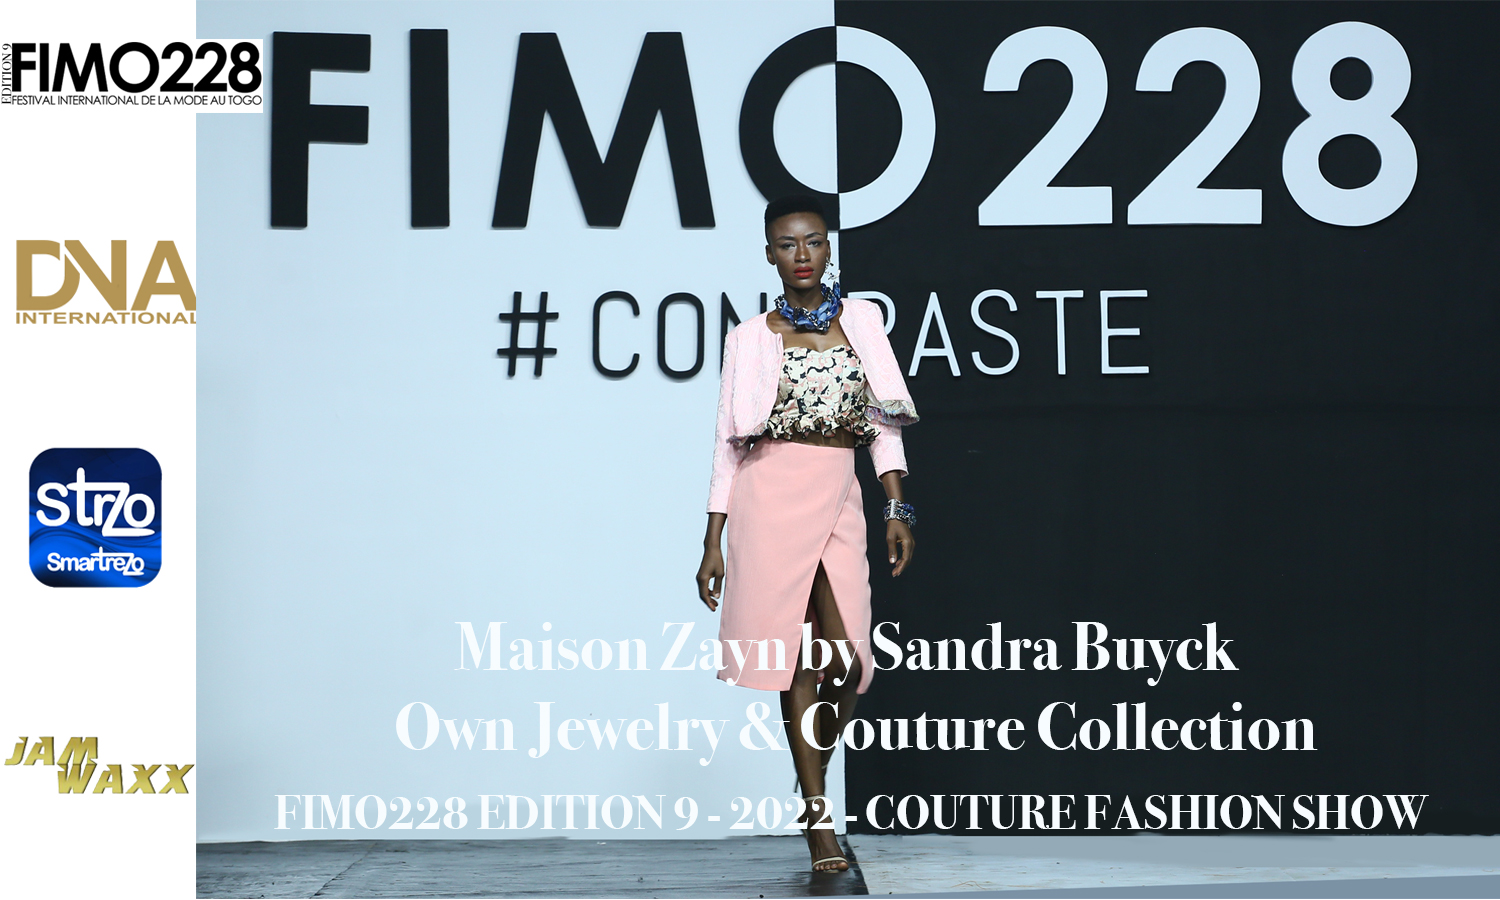 Maison-Zayn-by-Sandra-Buyck -Own-Jewelry-&-Couture-Collection-FIMO228-EDITION-9-2022-COUTURE-FASHION-SHOW-DN-AFRICA-DN-A-INTERNATIONAL-MEDIA-PARTNER